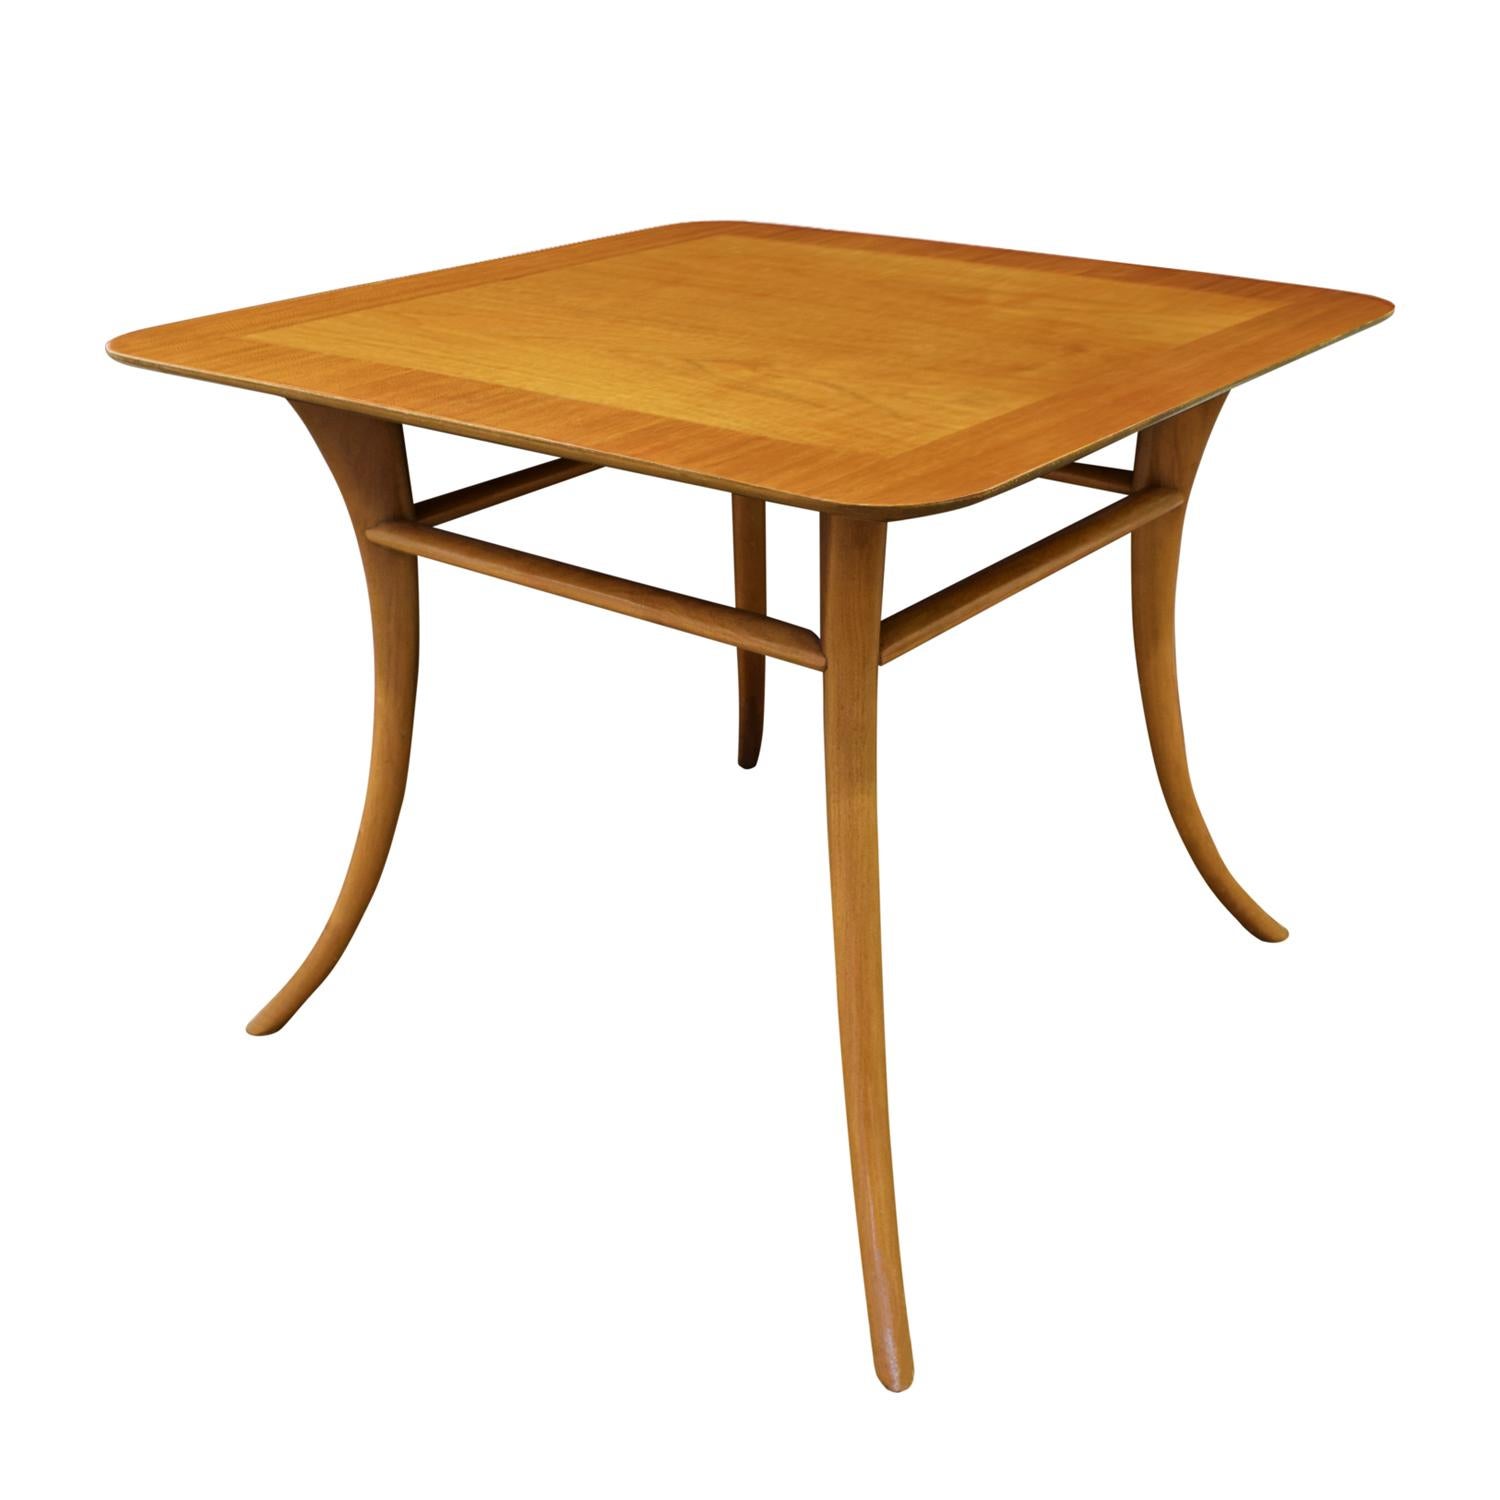 Mid-Century Modern T.H. Robsjohn-Gibbings End Table in Walnut with Klismos Legs, 1956 'Signed' For Sale